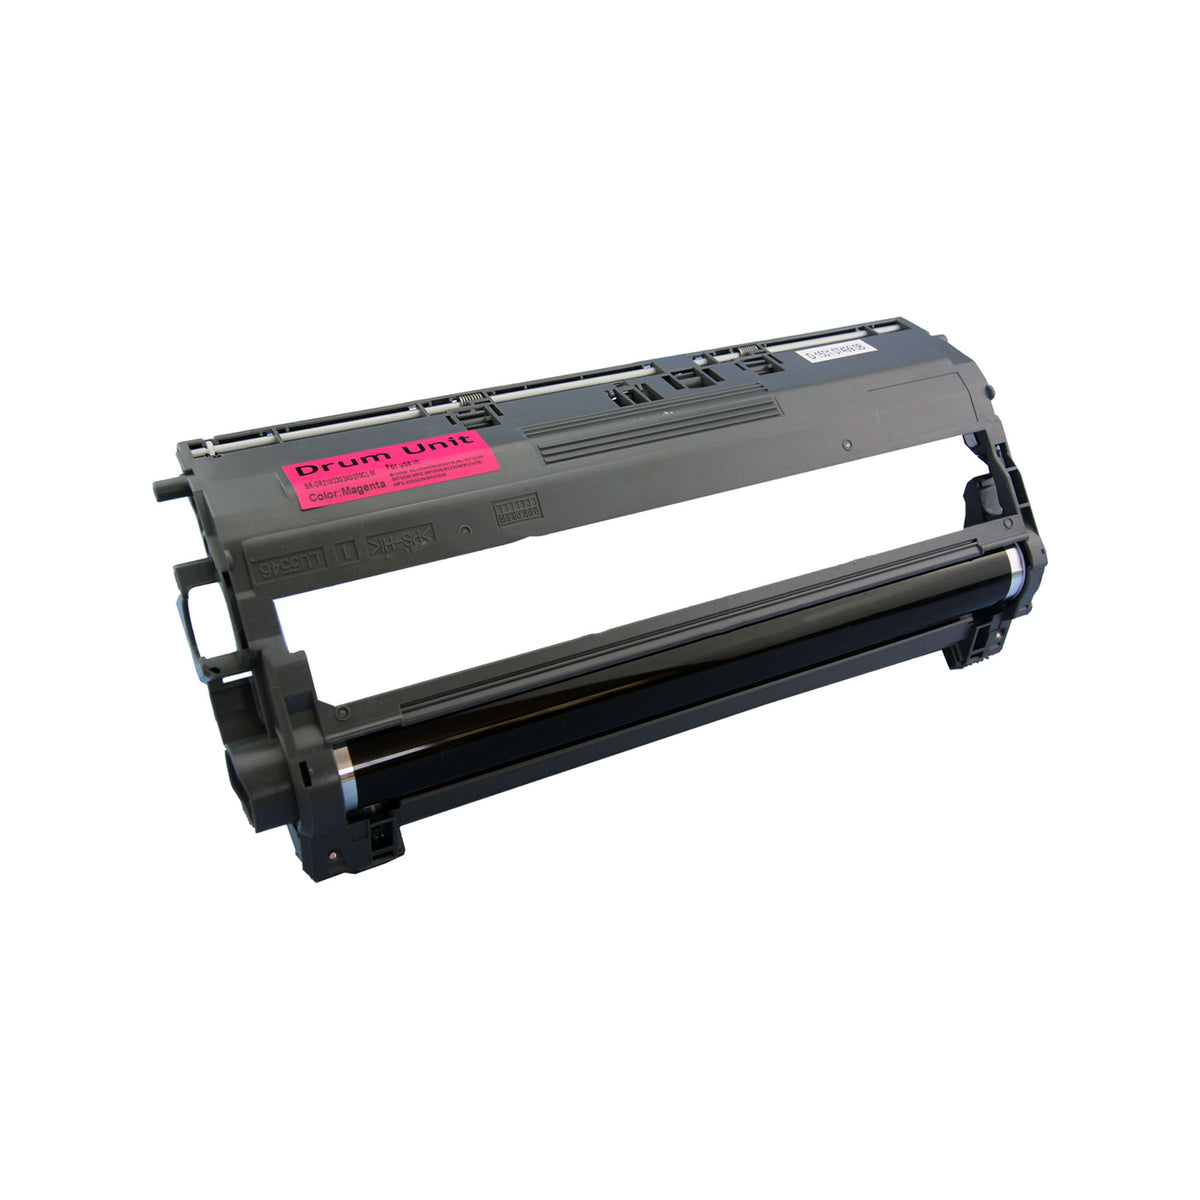 1x Compatible Brother DR-240 Magenta Drum Units